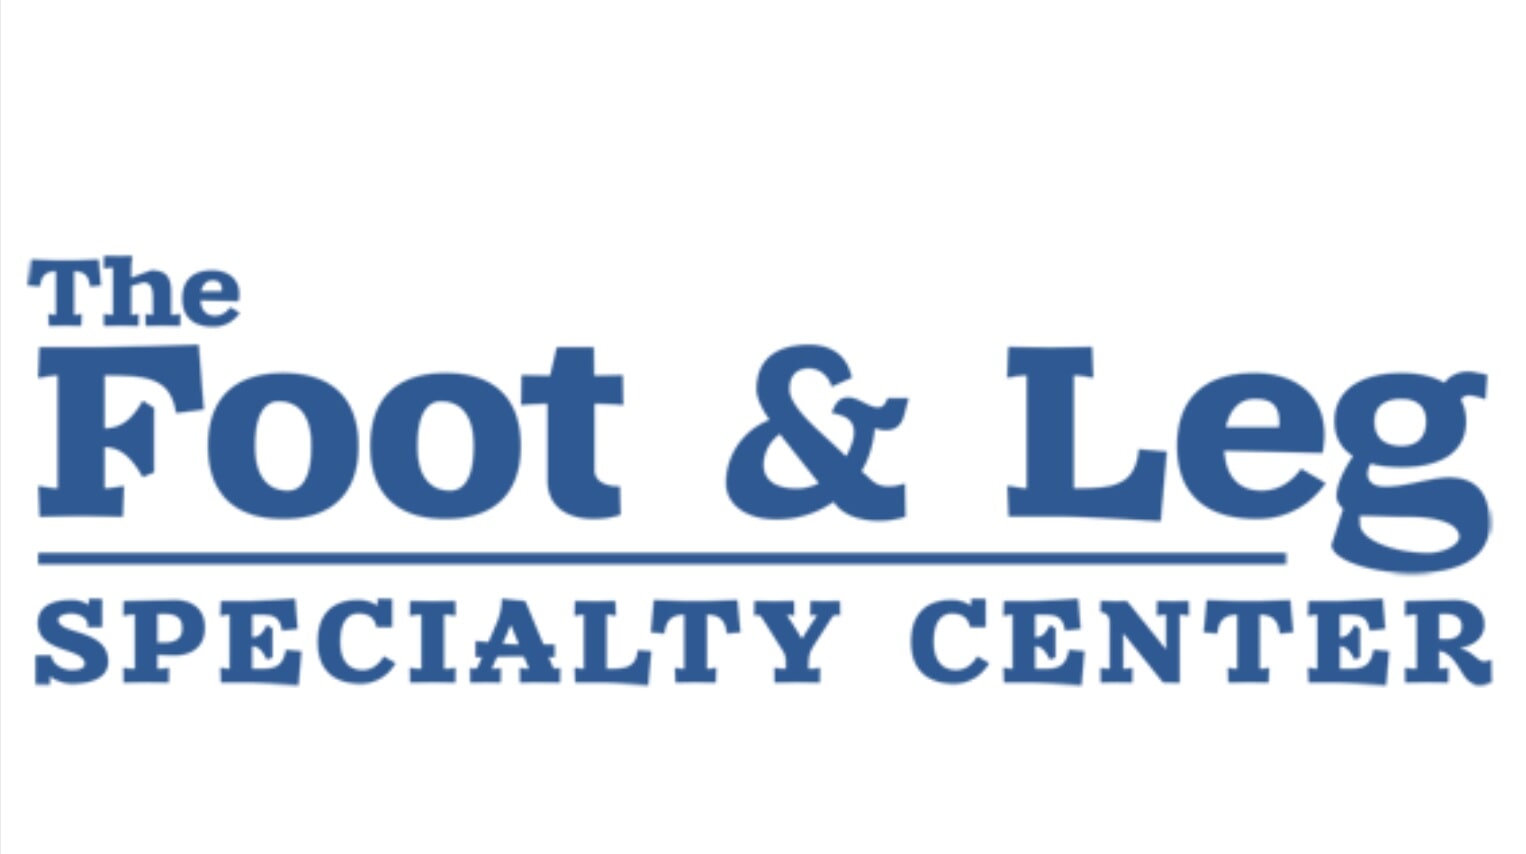 The Foot & Leg Specialty Center Photo